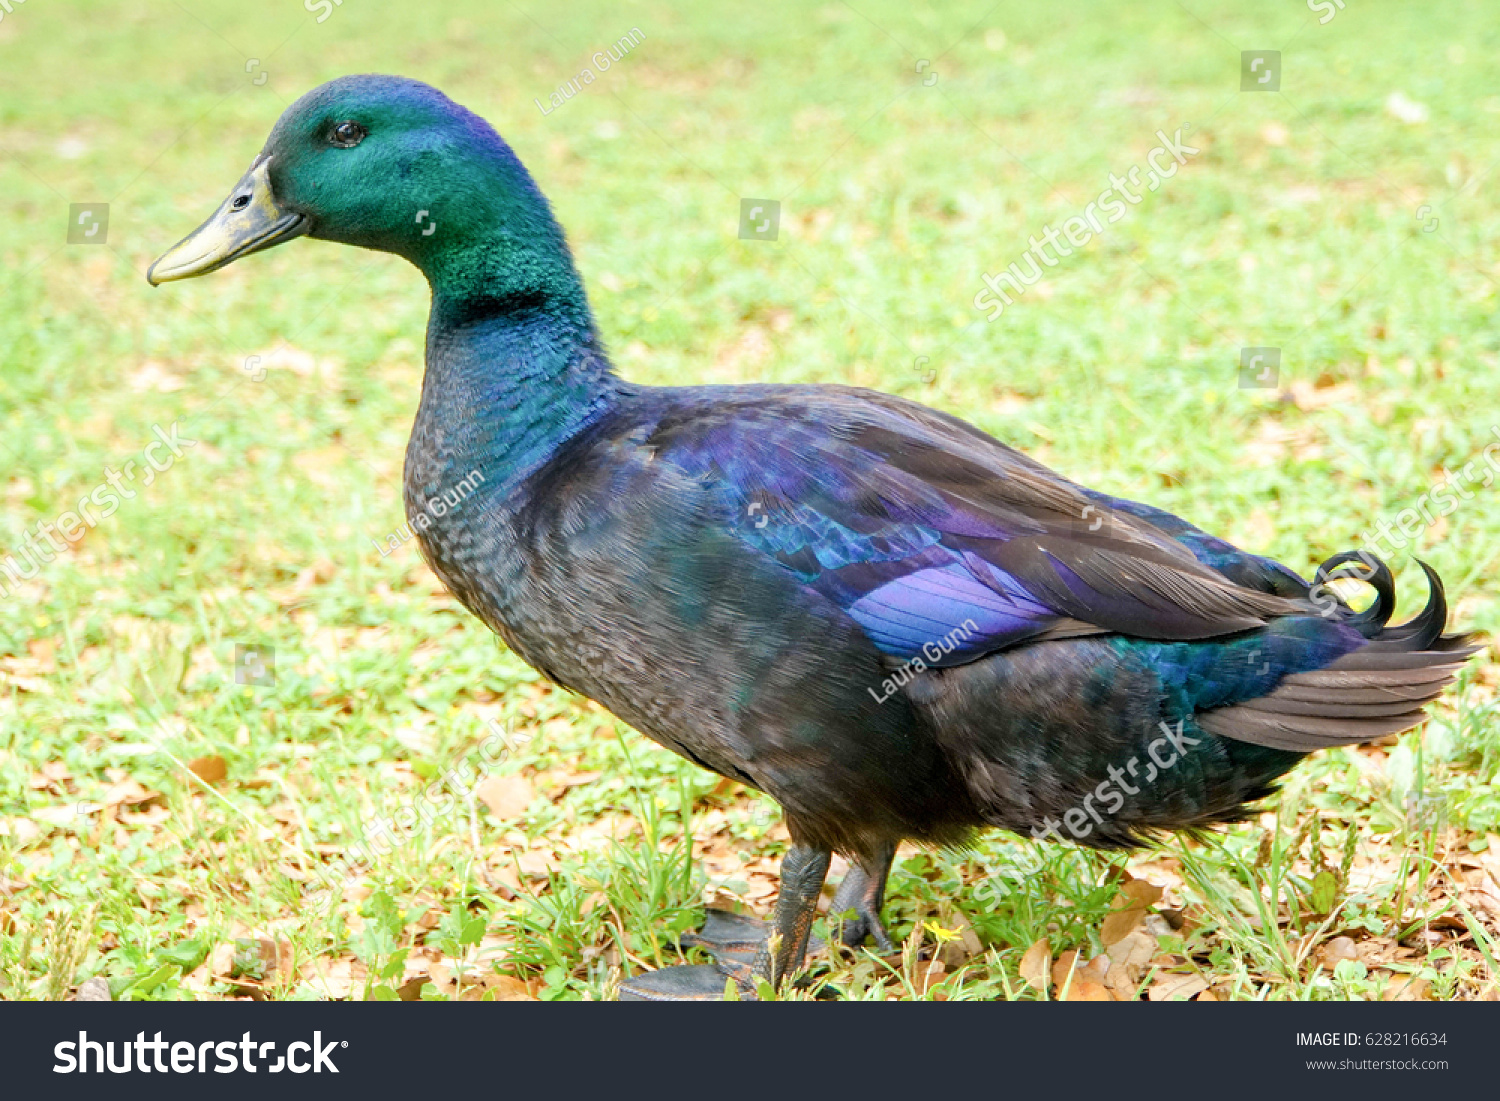 stock-photo-this-beautiful-duck-has-feat